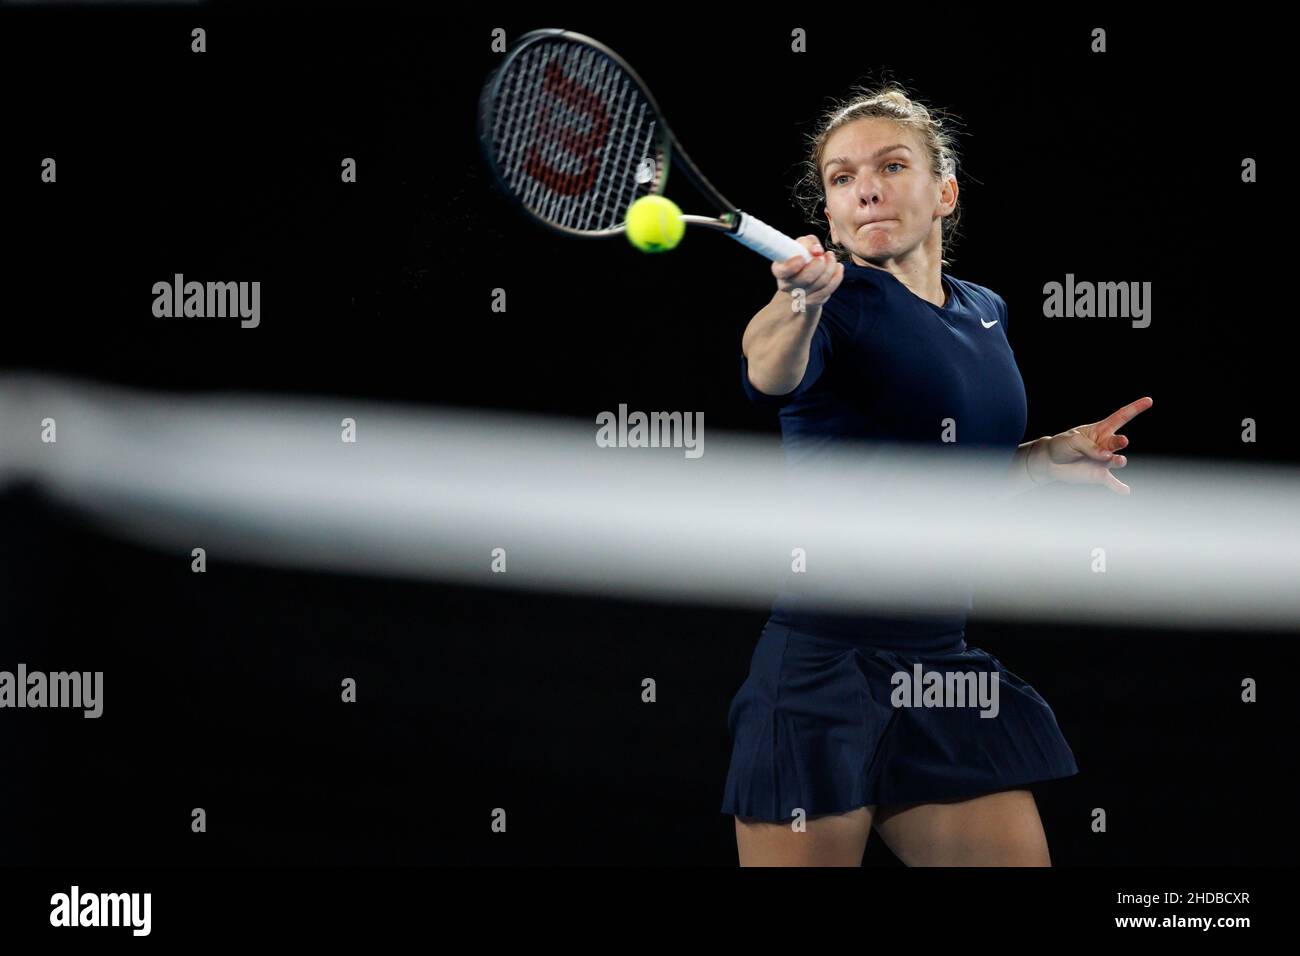 SIMONA HALEP (ROU) and NURIA PARRIZAS DIAZ (ESP) in action at the 2022 Melbourne Summer Set on Wednesday January 2022,  Melbourne Park Stock Photo